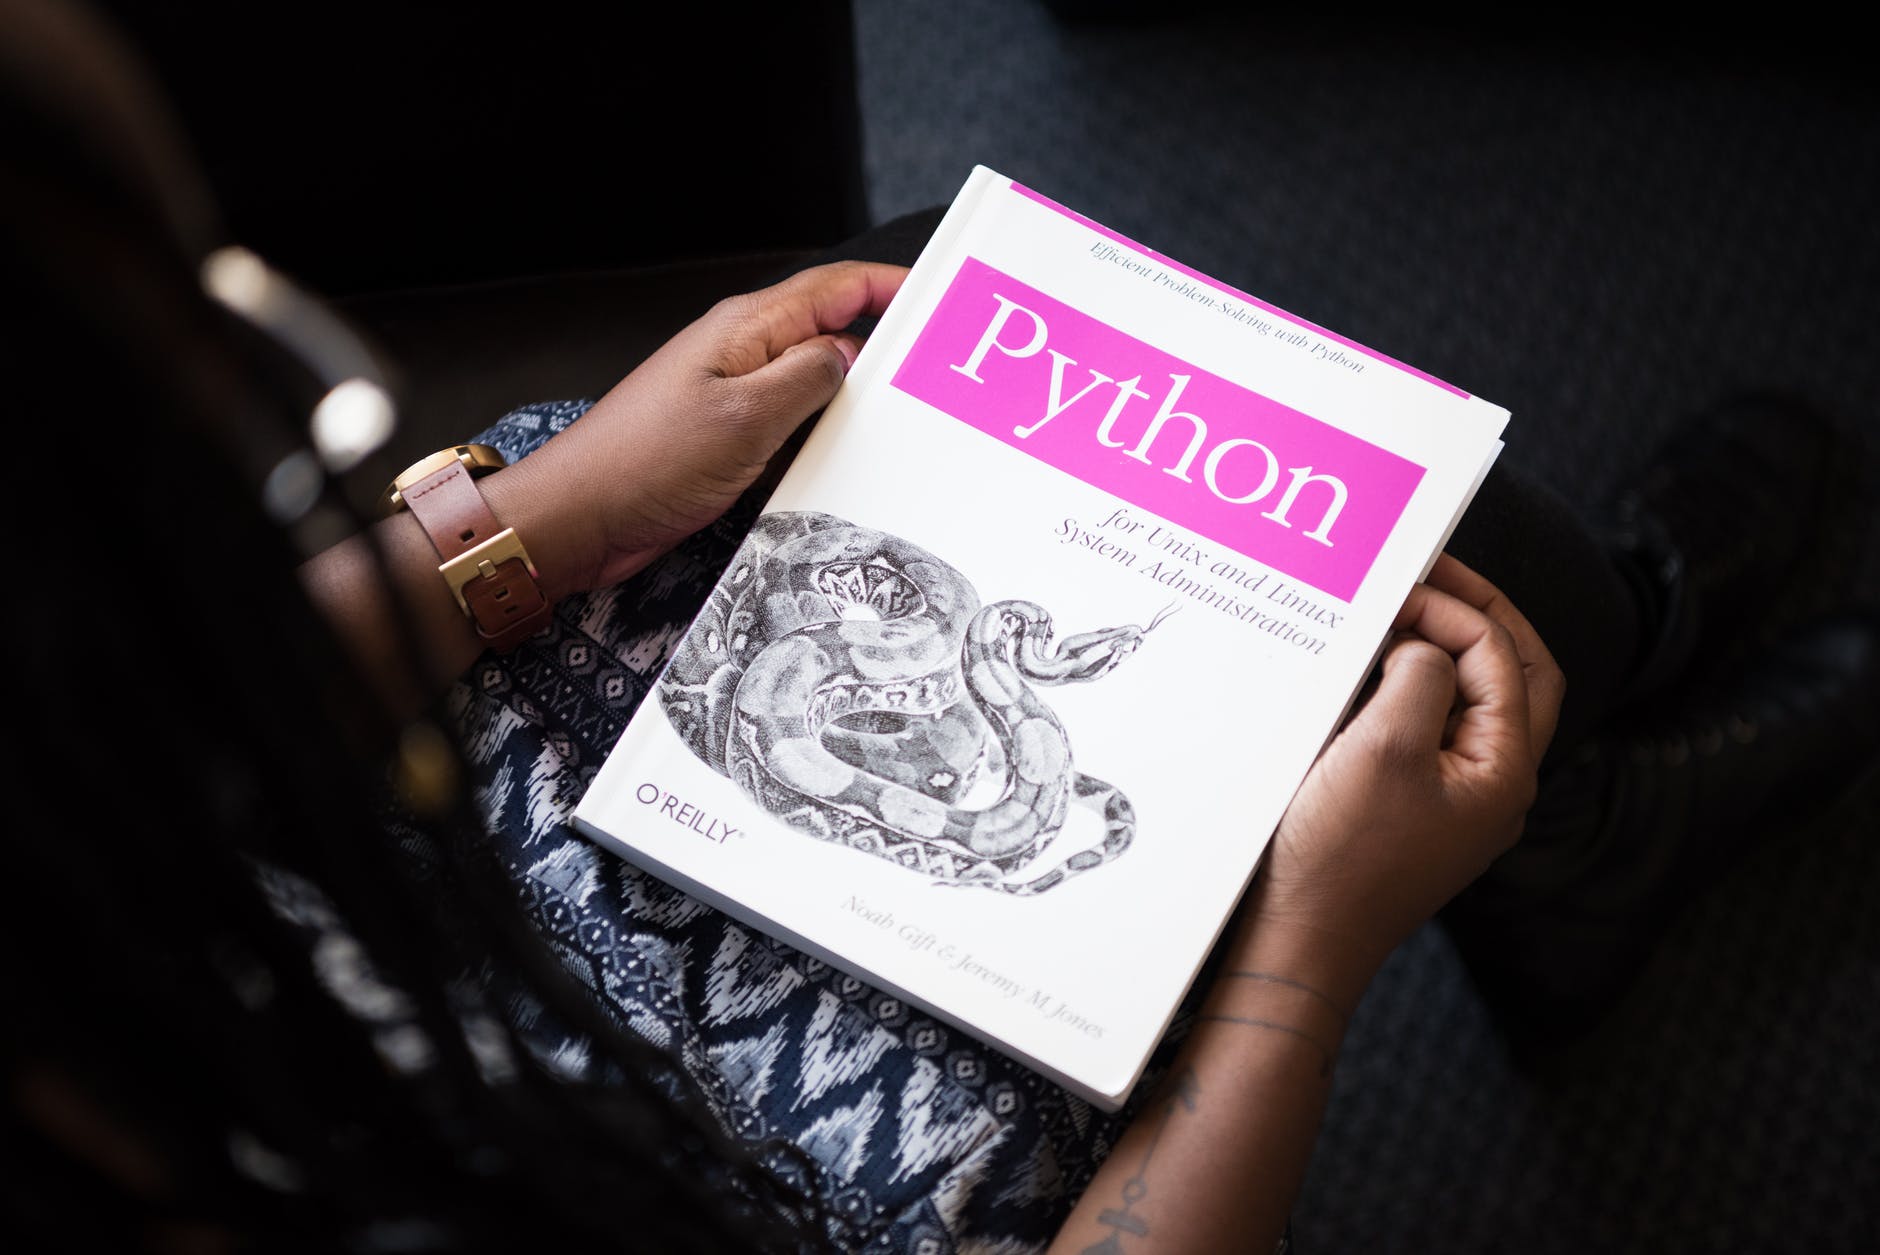 Chinese male dealing with middle-age crisis: learn Python